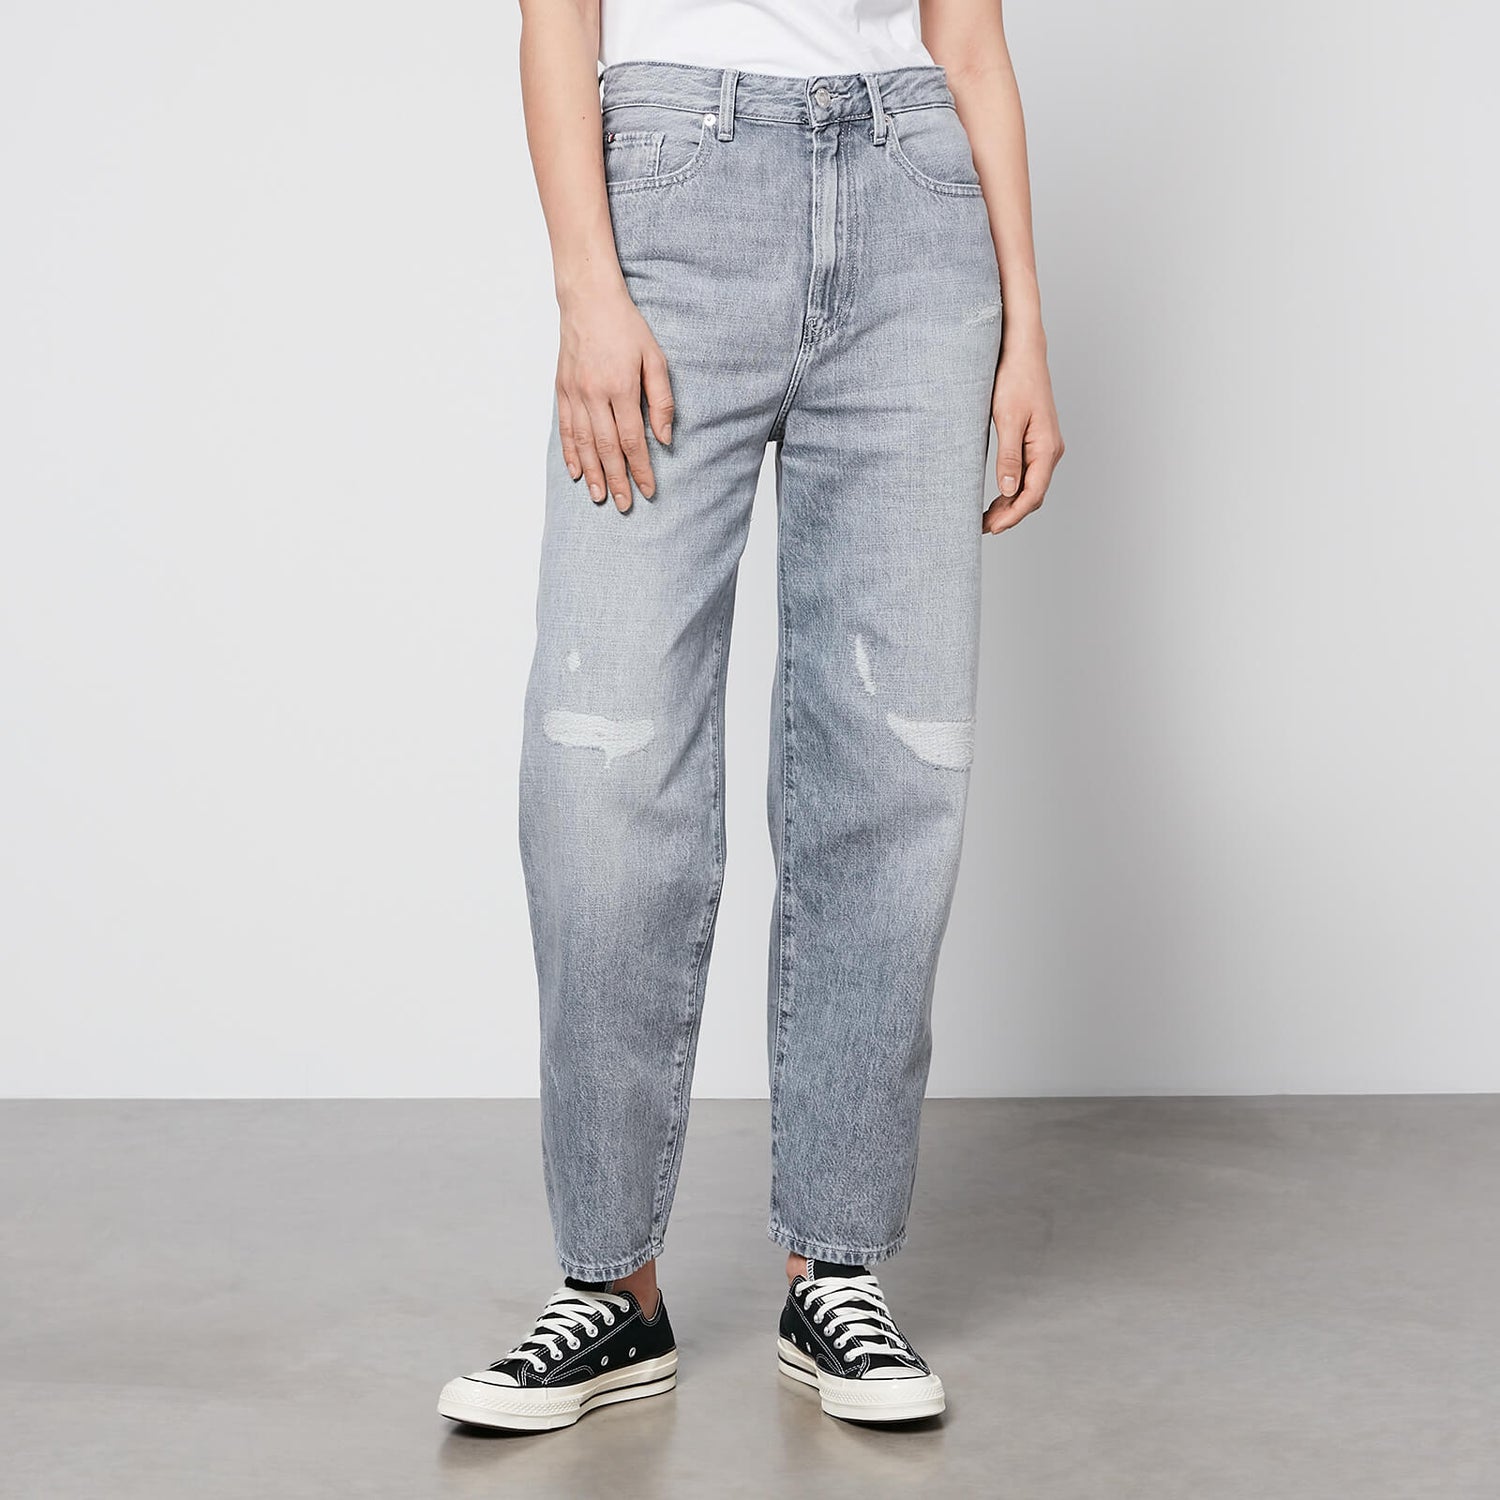 Tommy Hilfiger Balloon High-Waisted Ripped Denim Jeans - W30